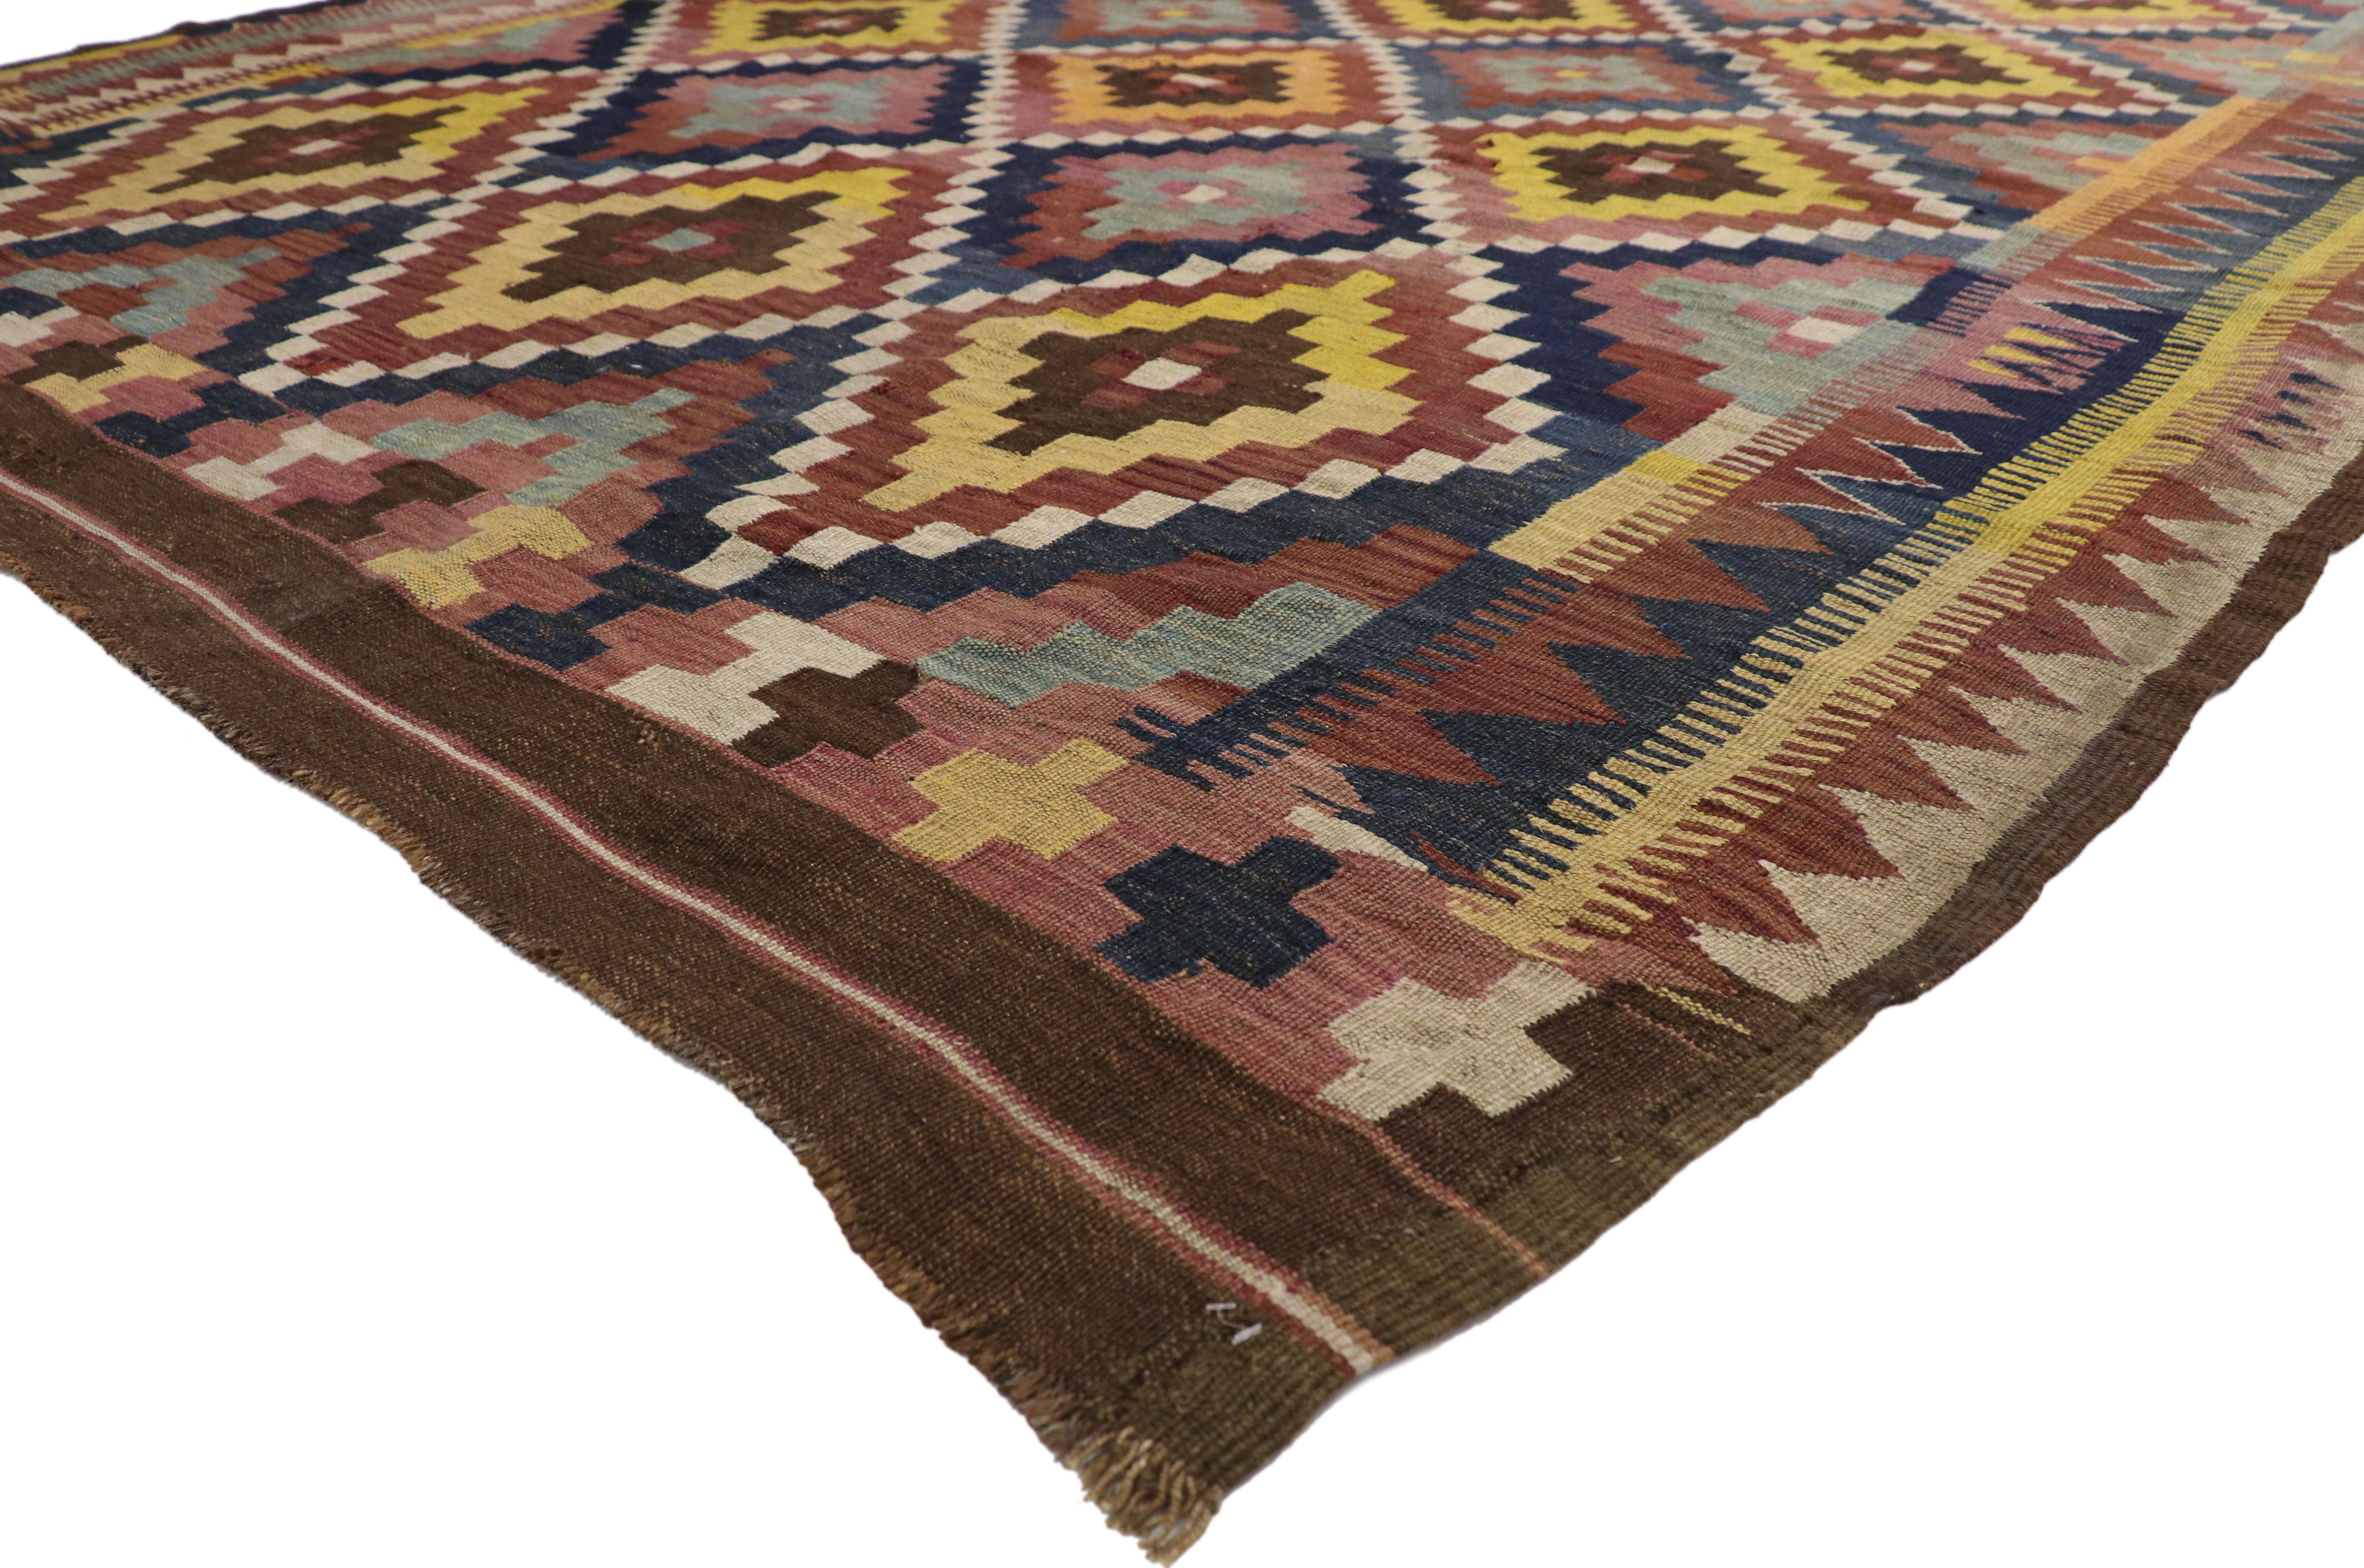 74692, vintage Afghan Ghalmouri Maimana Kilim rug with Nomadic Tribal style. Highlighting Primitive charm and nomadic tribal vibes, this handwoven wool vintage Afghan Ghalmouri Maimana Kilim rug beautifully showcases Mid-Century Modern style. It